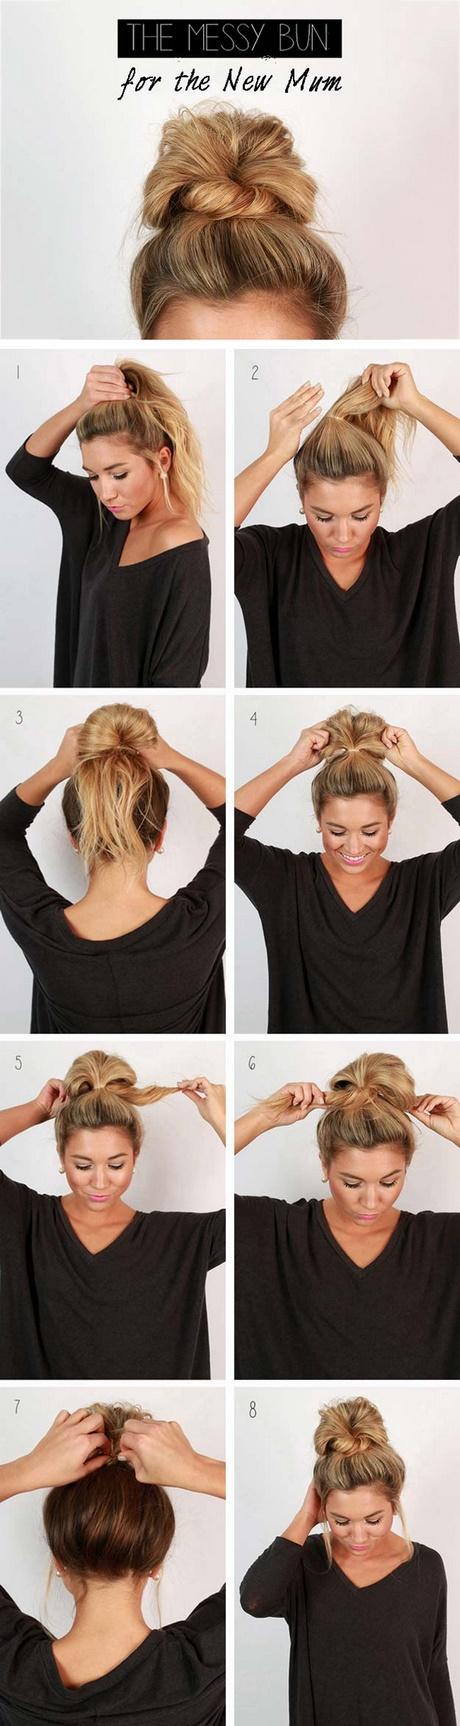 Easy hairstyles for medium hair to do at home easy-hairstyles-for-medium-hair-to-do-at-home-46_10